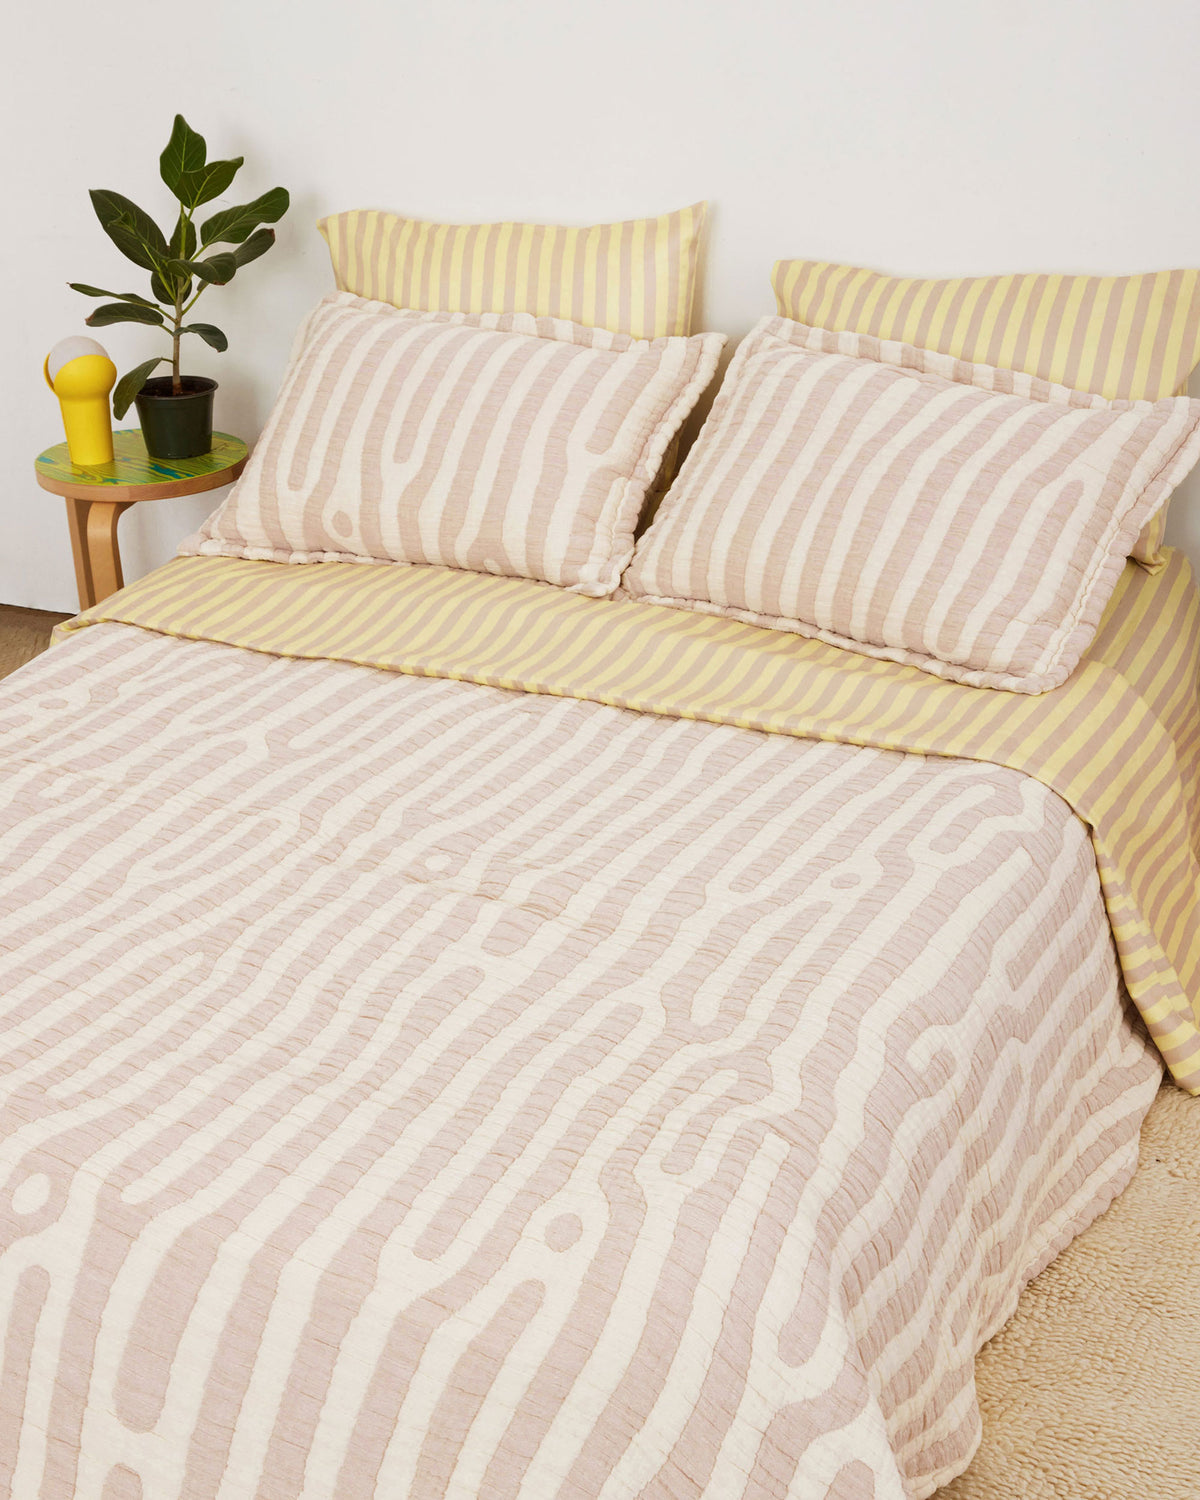 Birch Coverlet Set in tan and cream Birch print. Stone-washed, woven matelassé coverlet with an inner layer of insulation for a quilted effect. Extra soft and gauzy hand feel. 100% cotton shell, polyester fill. Made in Portugal.